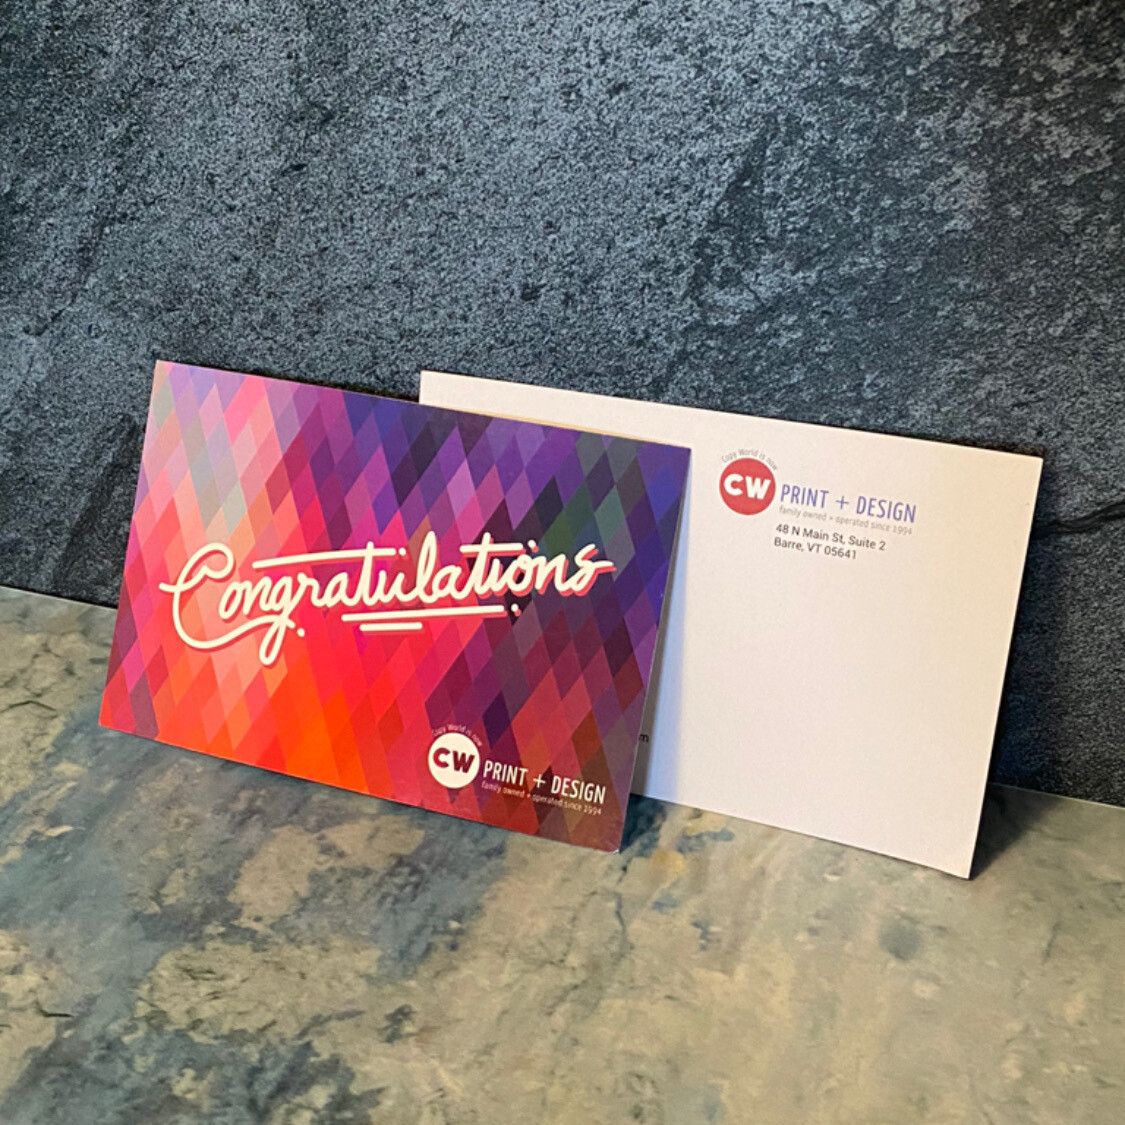 Printed congratulations postcards (for handwriting)